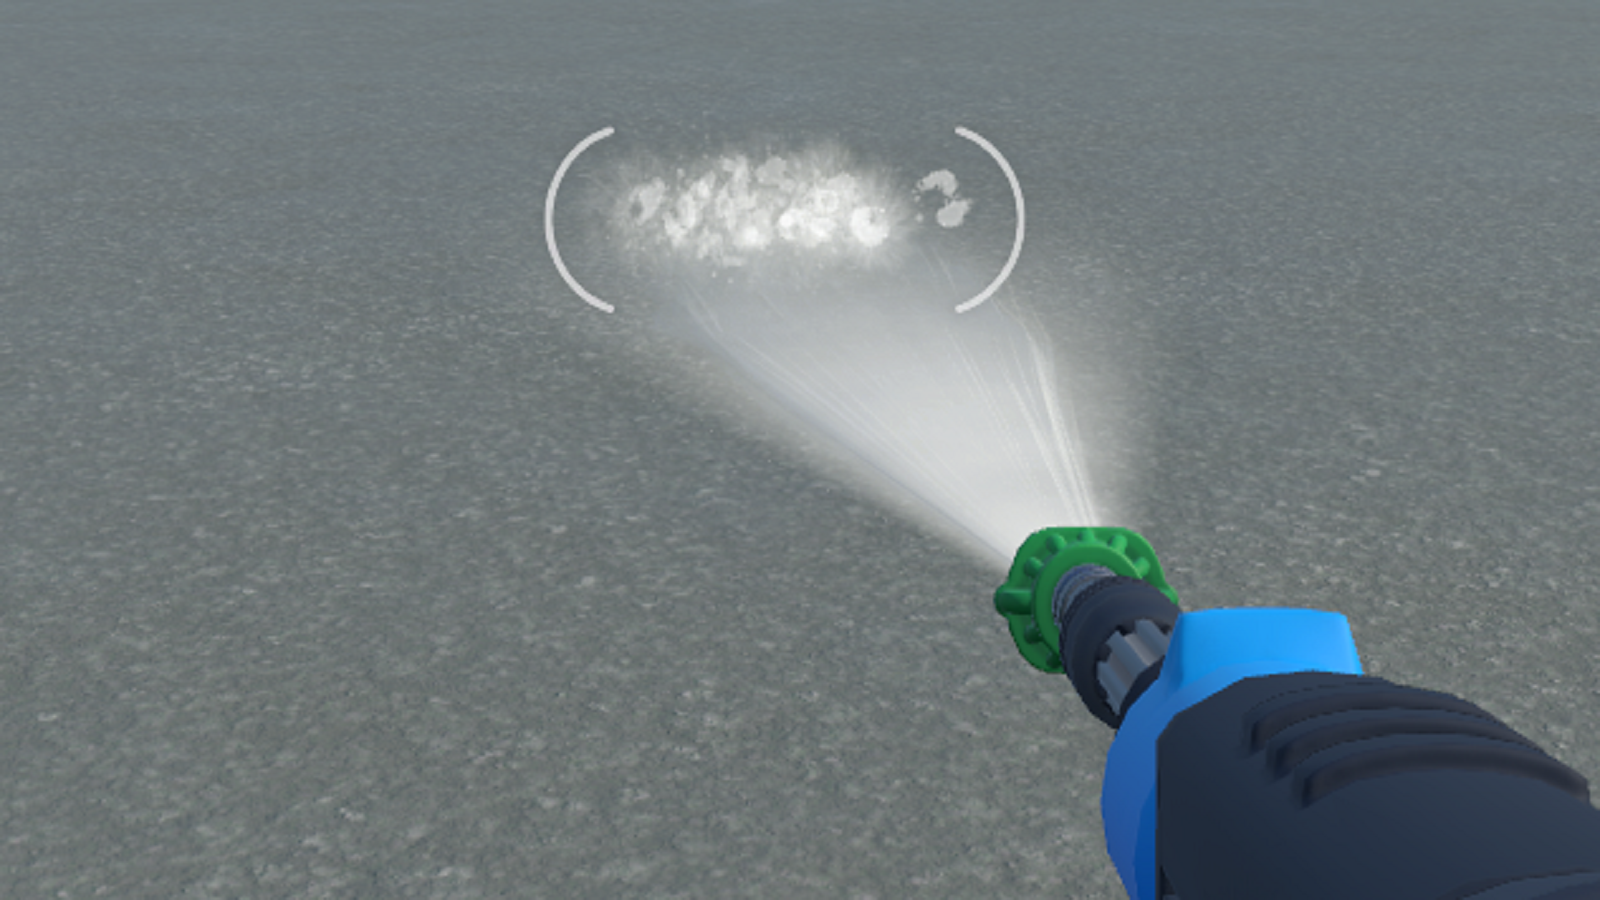 PowerWash Simulator - Nozzles and Extensions Information Details Explained! - Green (25°) nozzle - 60237AB